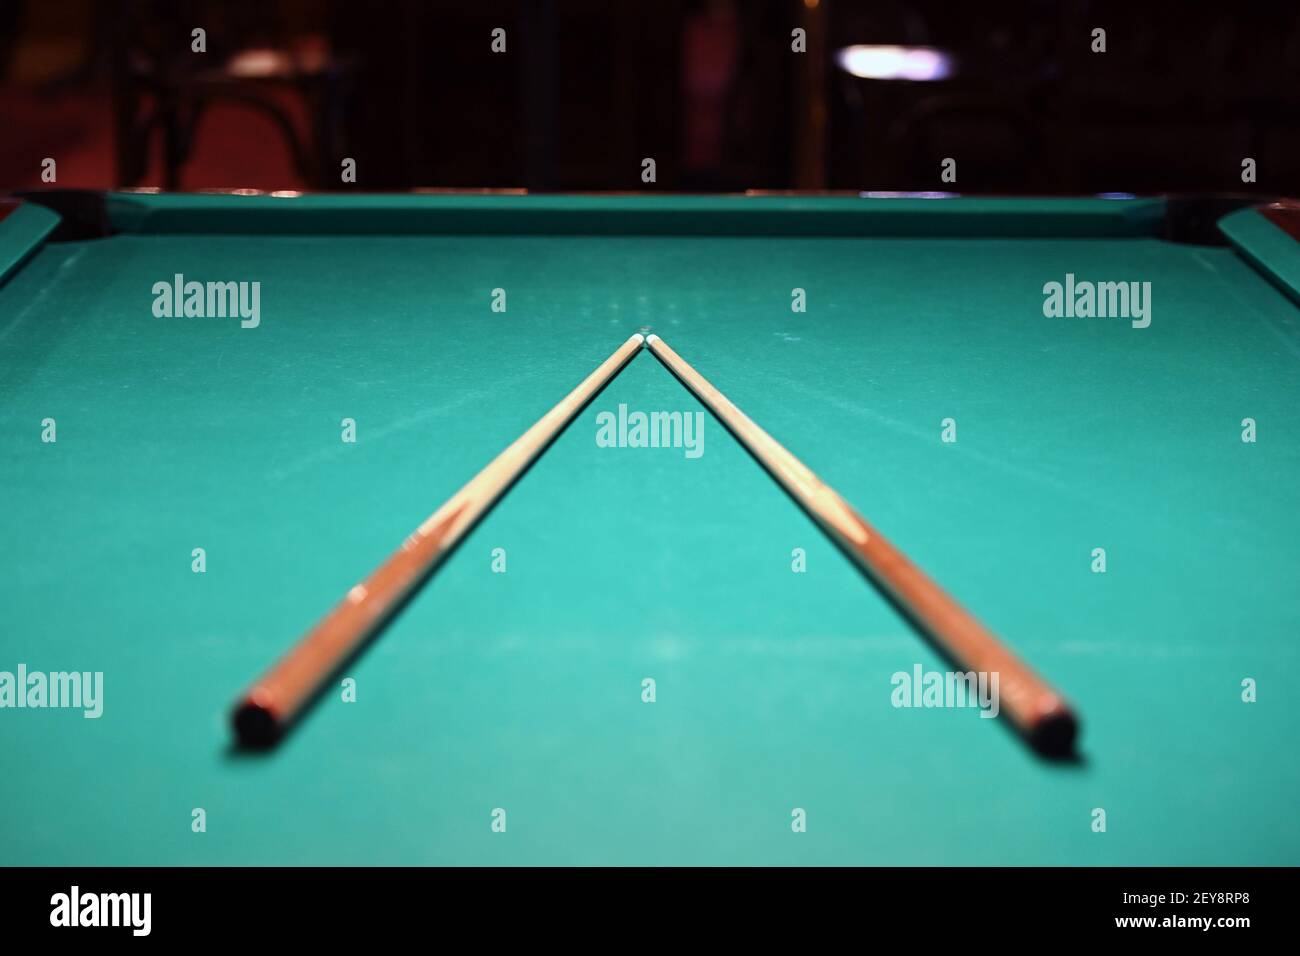 Pool Cues High Resolution Stock Photography and Images - Alamy